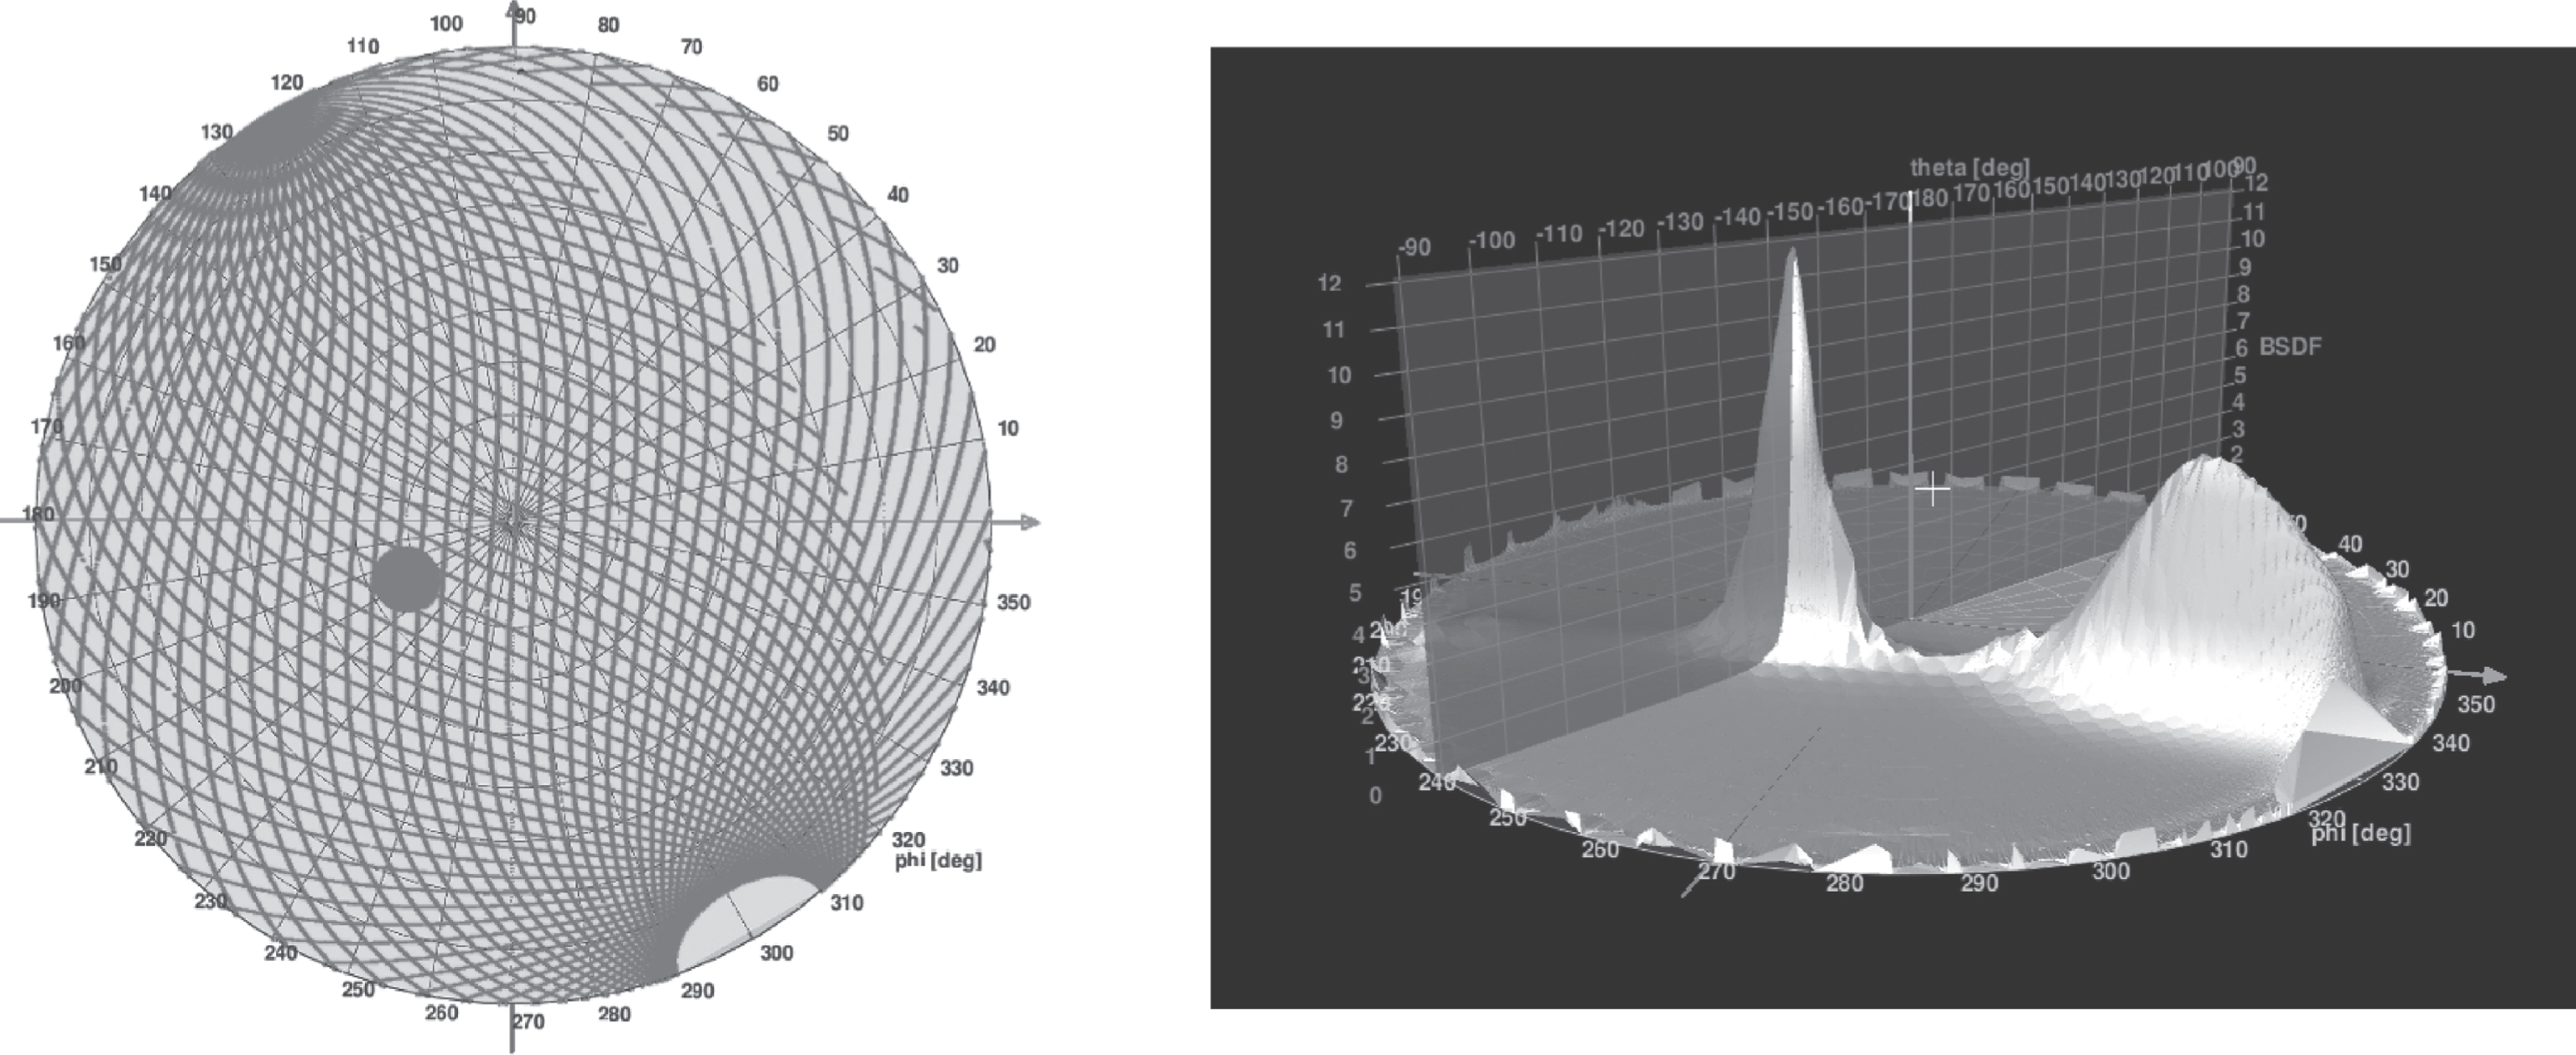 Left: Projection of the scanning paths of a goniophotometer detector head onto a plane. Each grey line consists of closely located points, representing measurement points on a hemisphere on the backside of the sample. The grey disc indicates a local region of high resolution data corresponding to a peak. Right: 3D mountain plot of BTDF data of a redirection system for one incoming light direction, showing light scattering from one incoming direction into different outgoing directions.